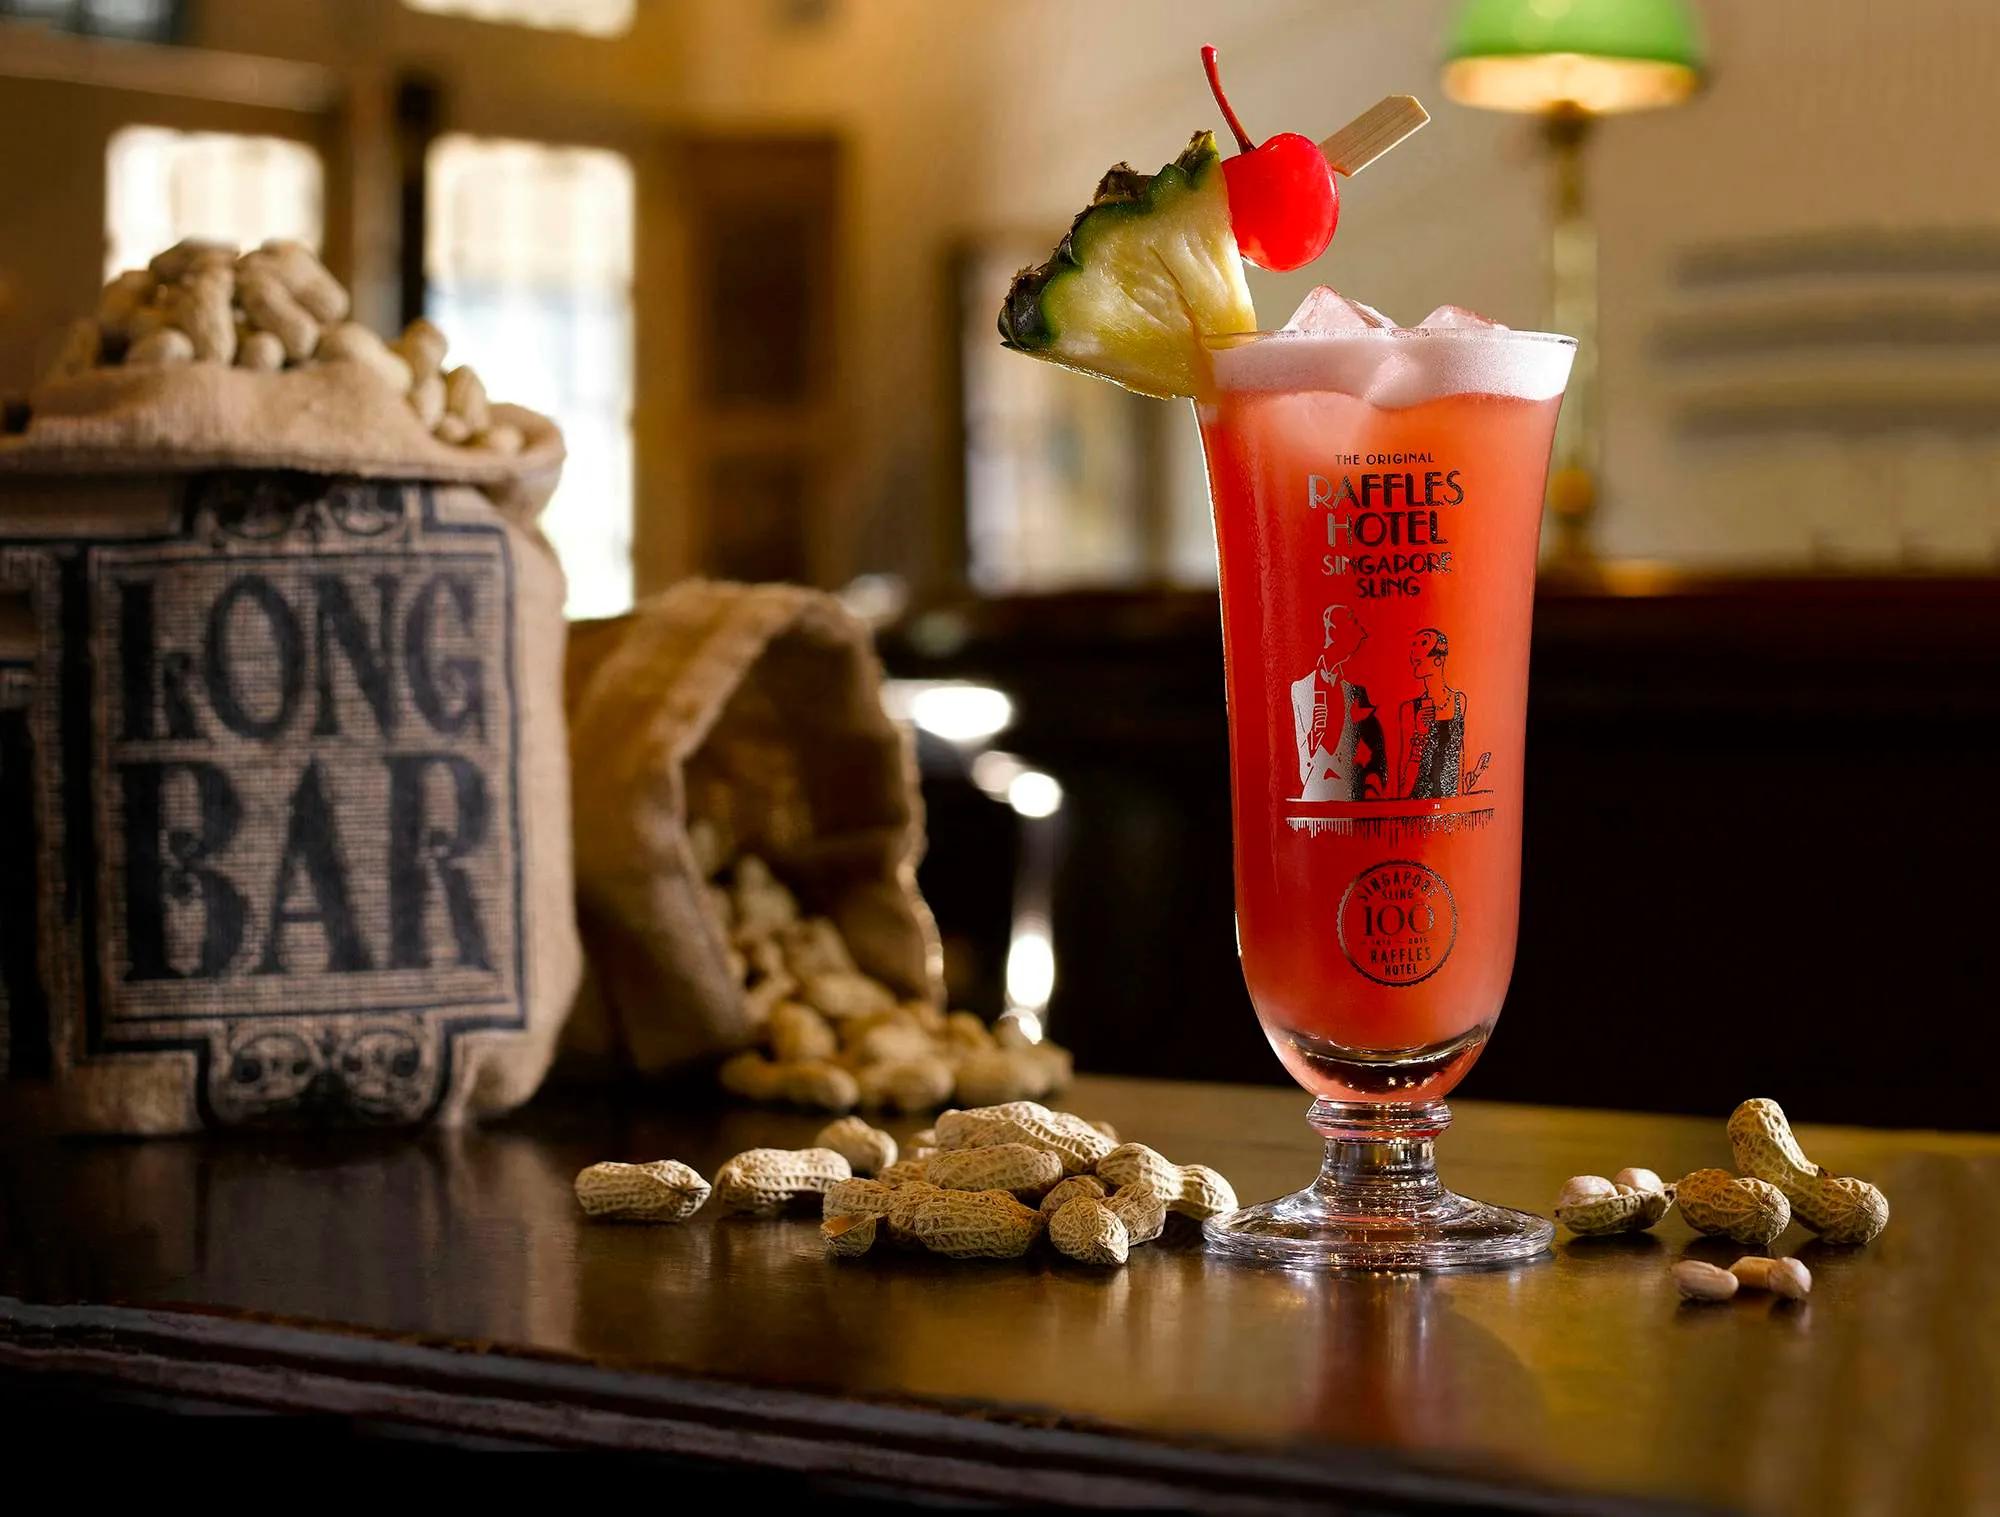 Raffles Hotel’s iconic Singapore Sling returns home to the Long Bar